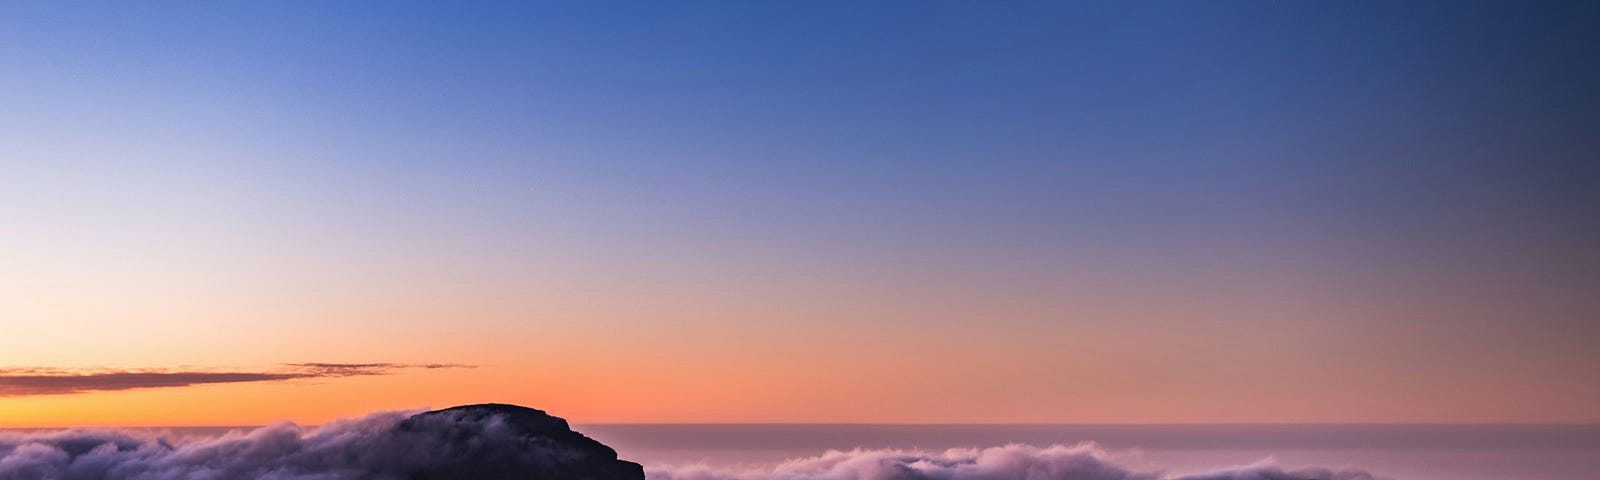 A view of dawn over a mountain top laced with clouds, the top of the photo is a deeper blue and the horizon orange and lavender